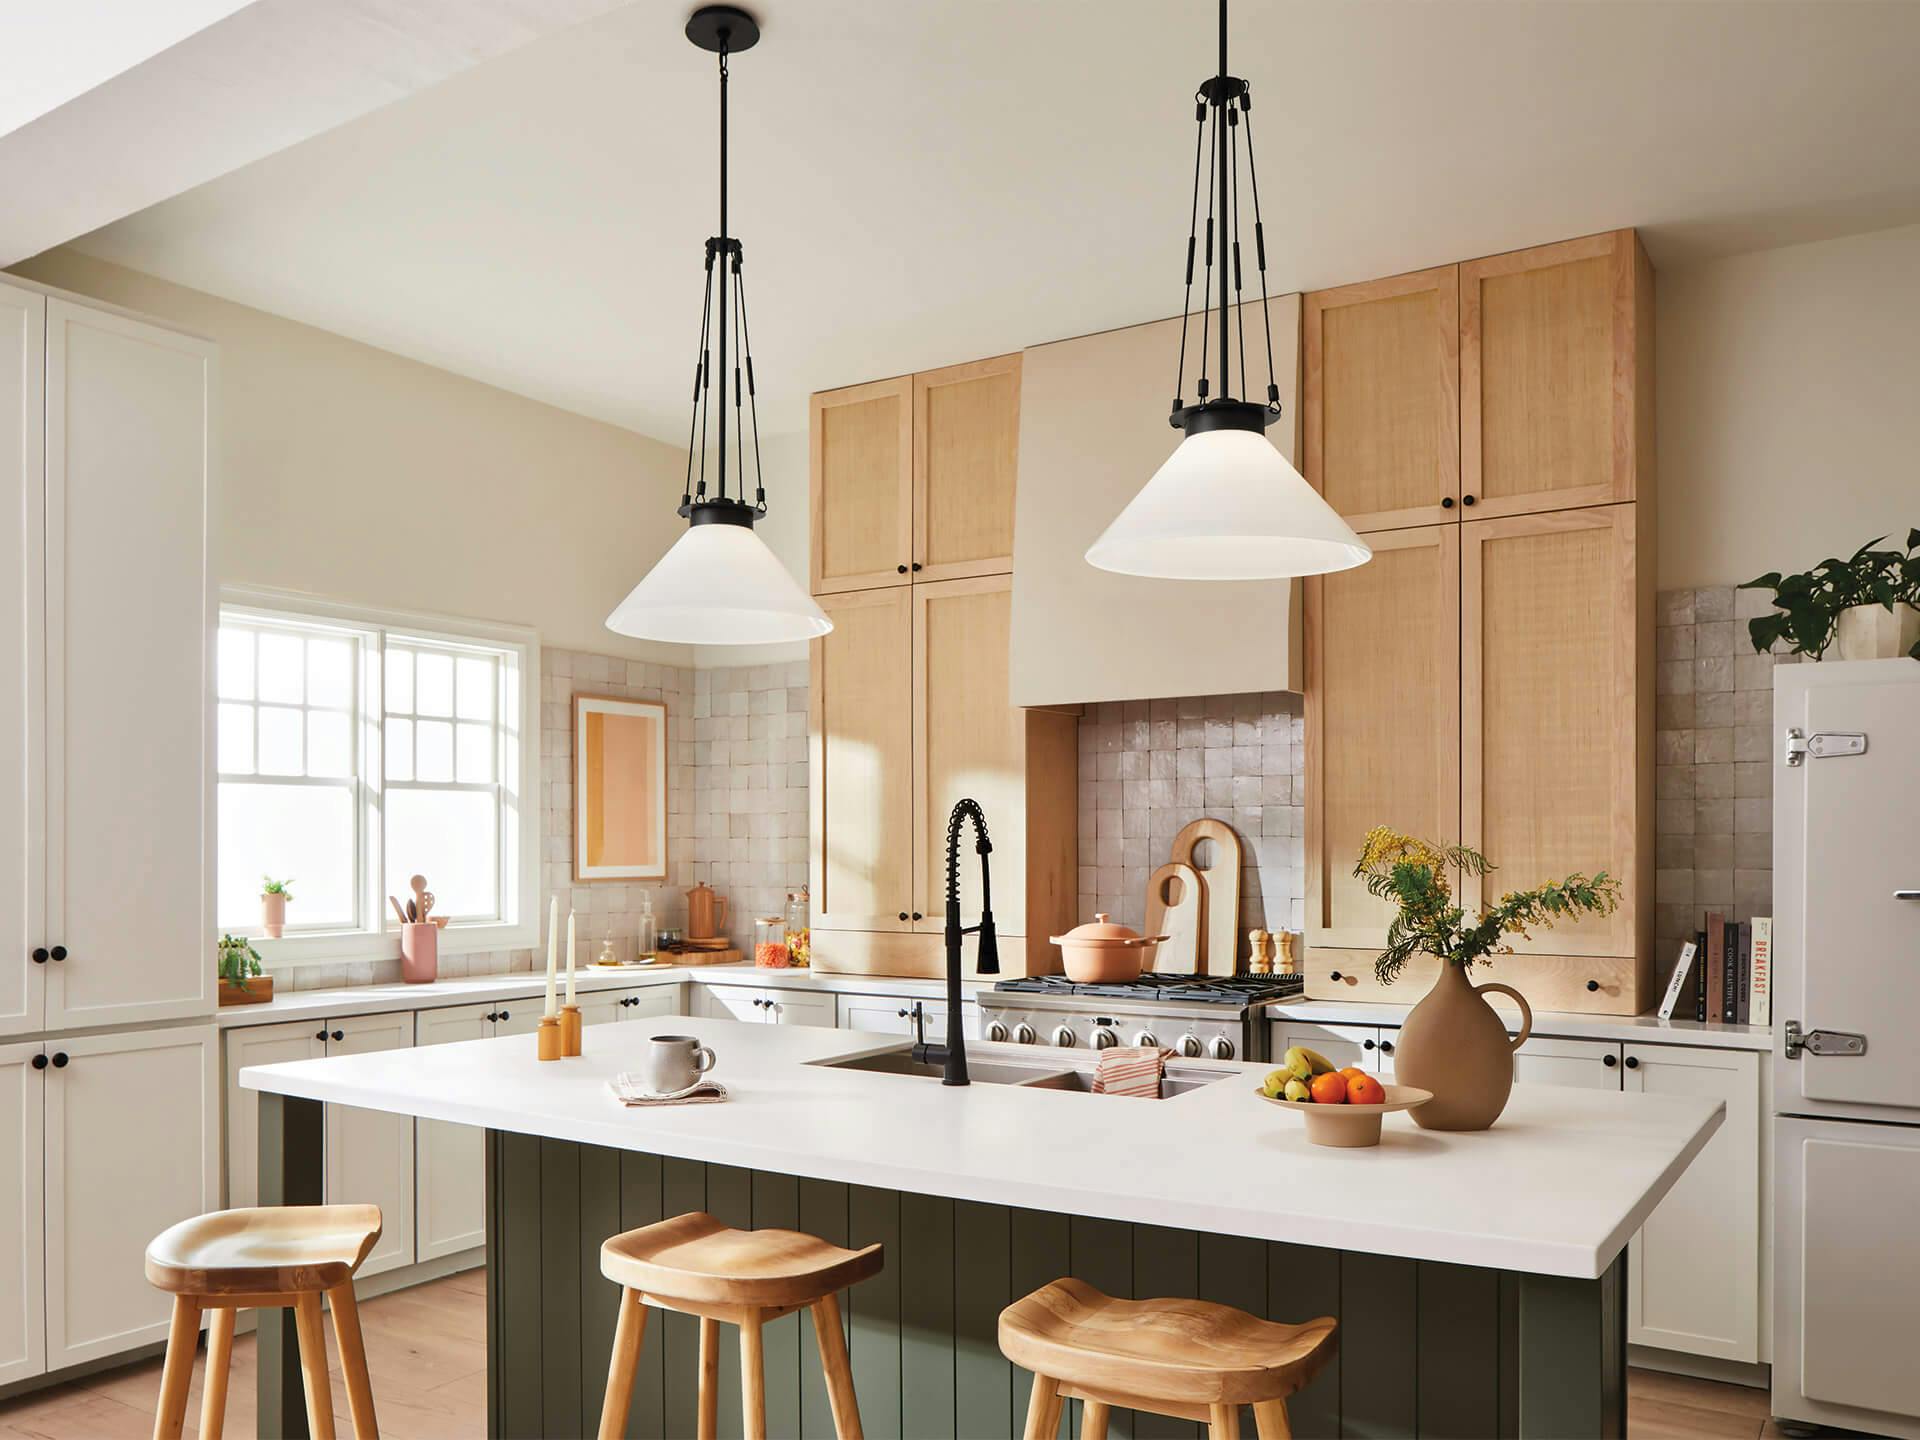 White and natural wood kitchen with two Albers pendants in black finish hanging over the center island